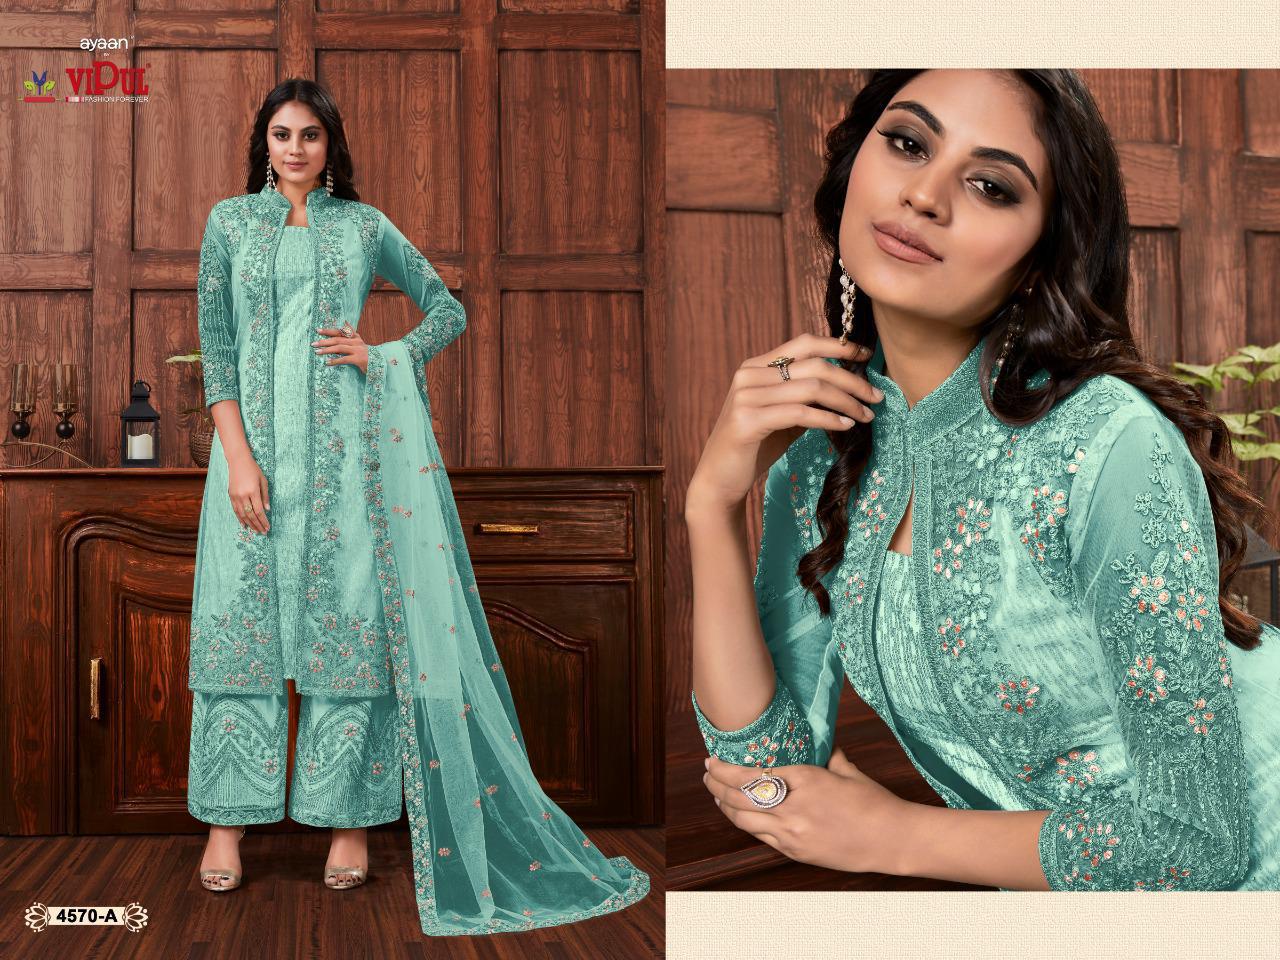 Vipul Fashion Pristine 4570 colors Premium Quality Palazzo Salwar Kameez  Net Fabric Embroidered Designer Long Koti Style Salwar Suit Single Piece  wholesale Supplier from Surat at Best Price - Full Set -